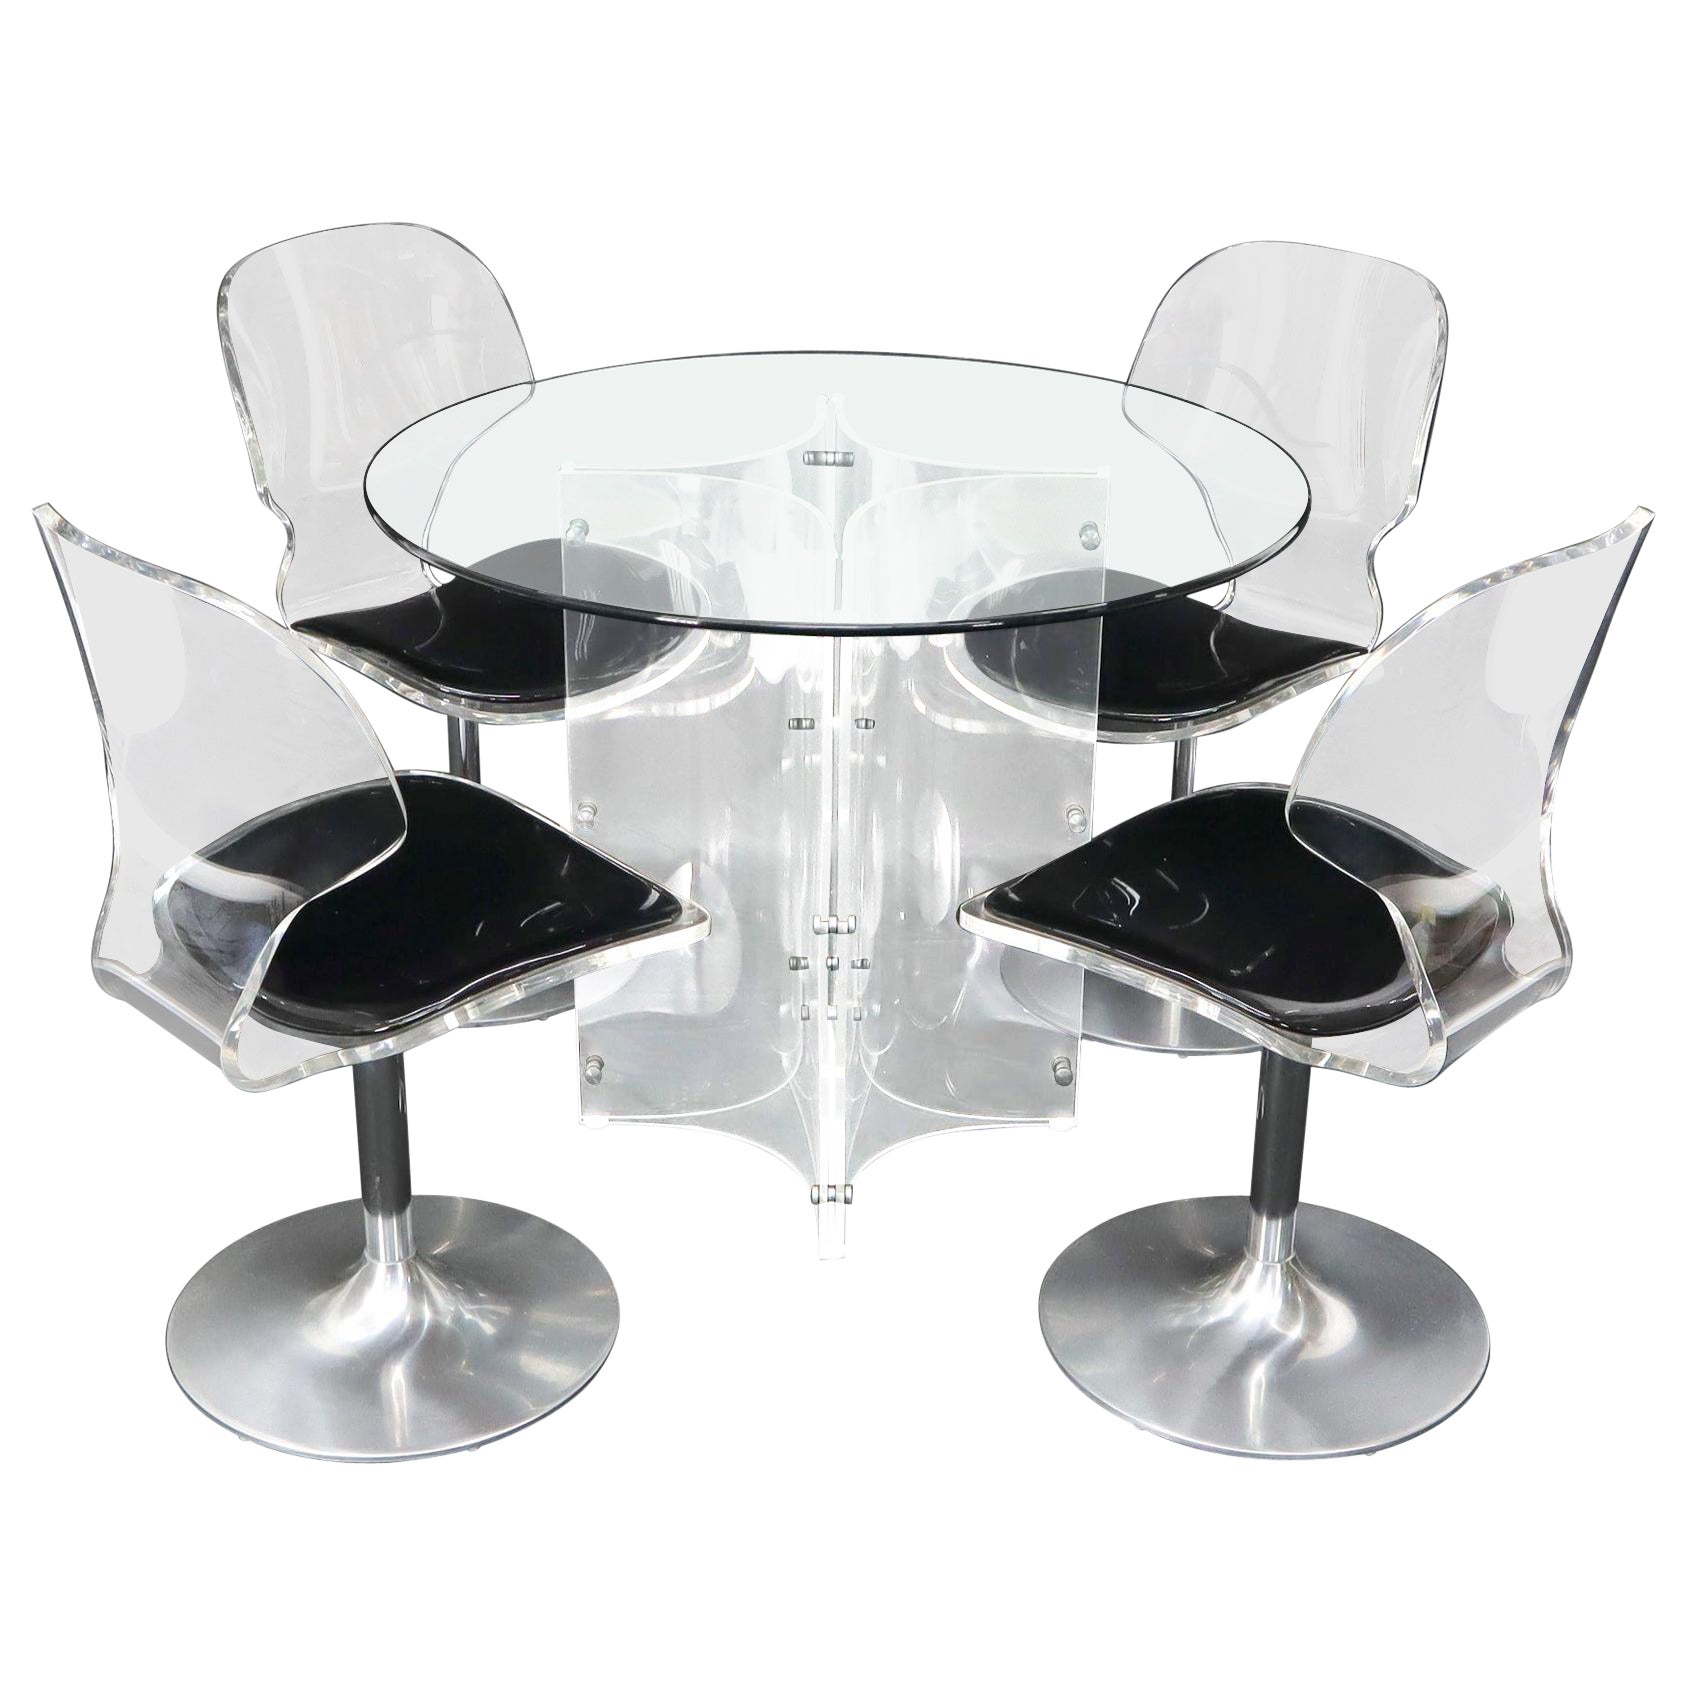 Tulip Chrome Base Lucite Seats Set of 4 Chairs Dining Table with Glass Round Top For Sale